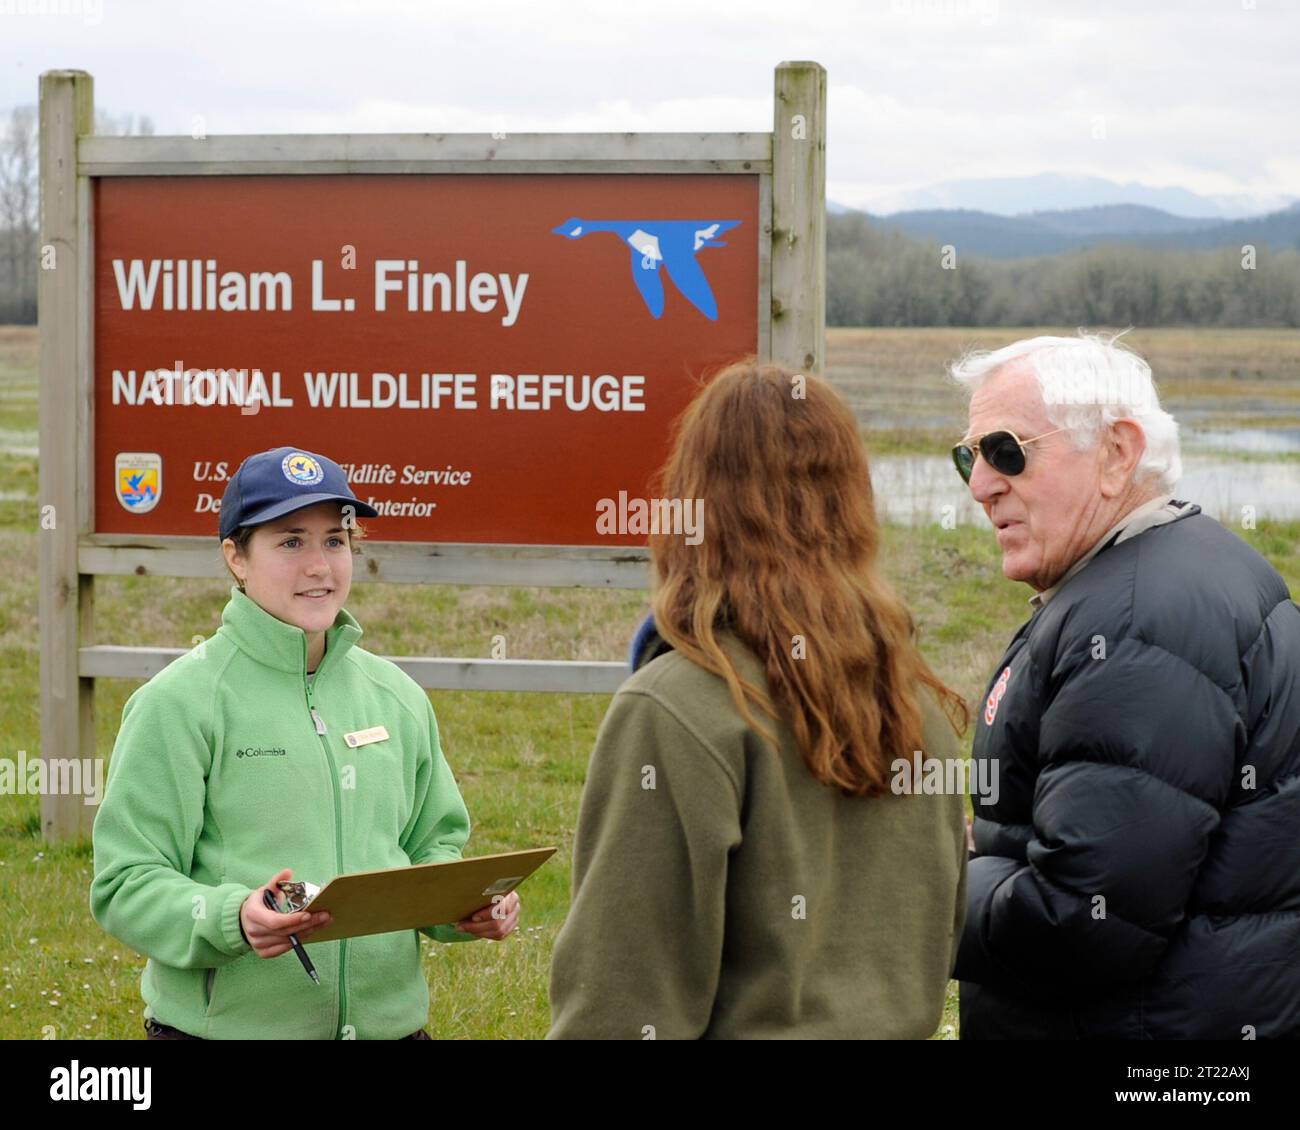 A USFWS employee performs a satisfaction survey with visitors to the Willaim L. Finley National Wildlife Refuge. Subjects: Wildlife refuges; Visitor services; Connecting people with nature; volunteers; signs. Location: Oregon. Fish and Wildlife Service Site: WILLIAM L. FINLEY NATIONAL WILDLIFE REFUGE. Stock Photo